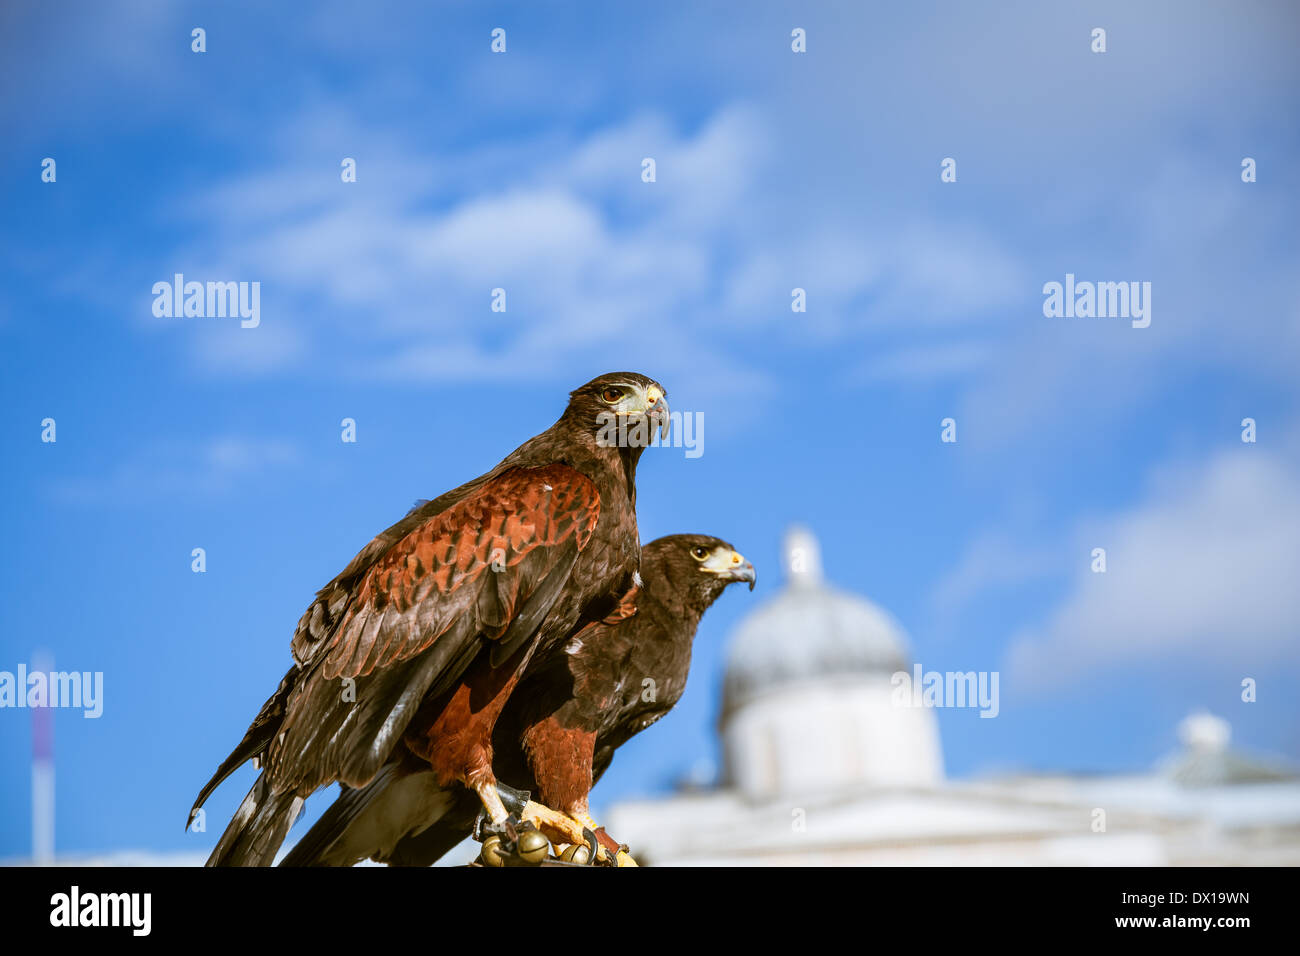 Majestic Eagles Beneath a Bright Blue Sky in Westminster, London. Stock Photo